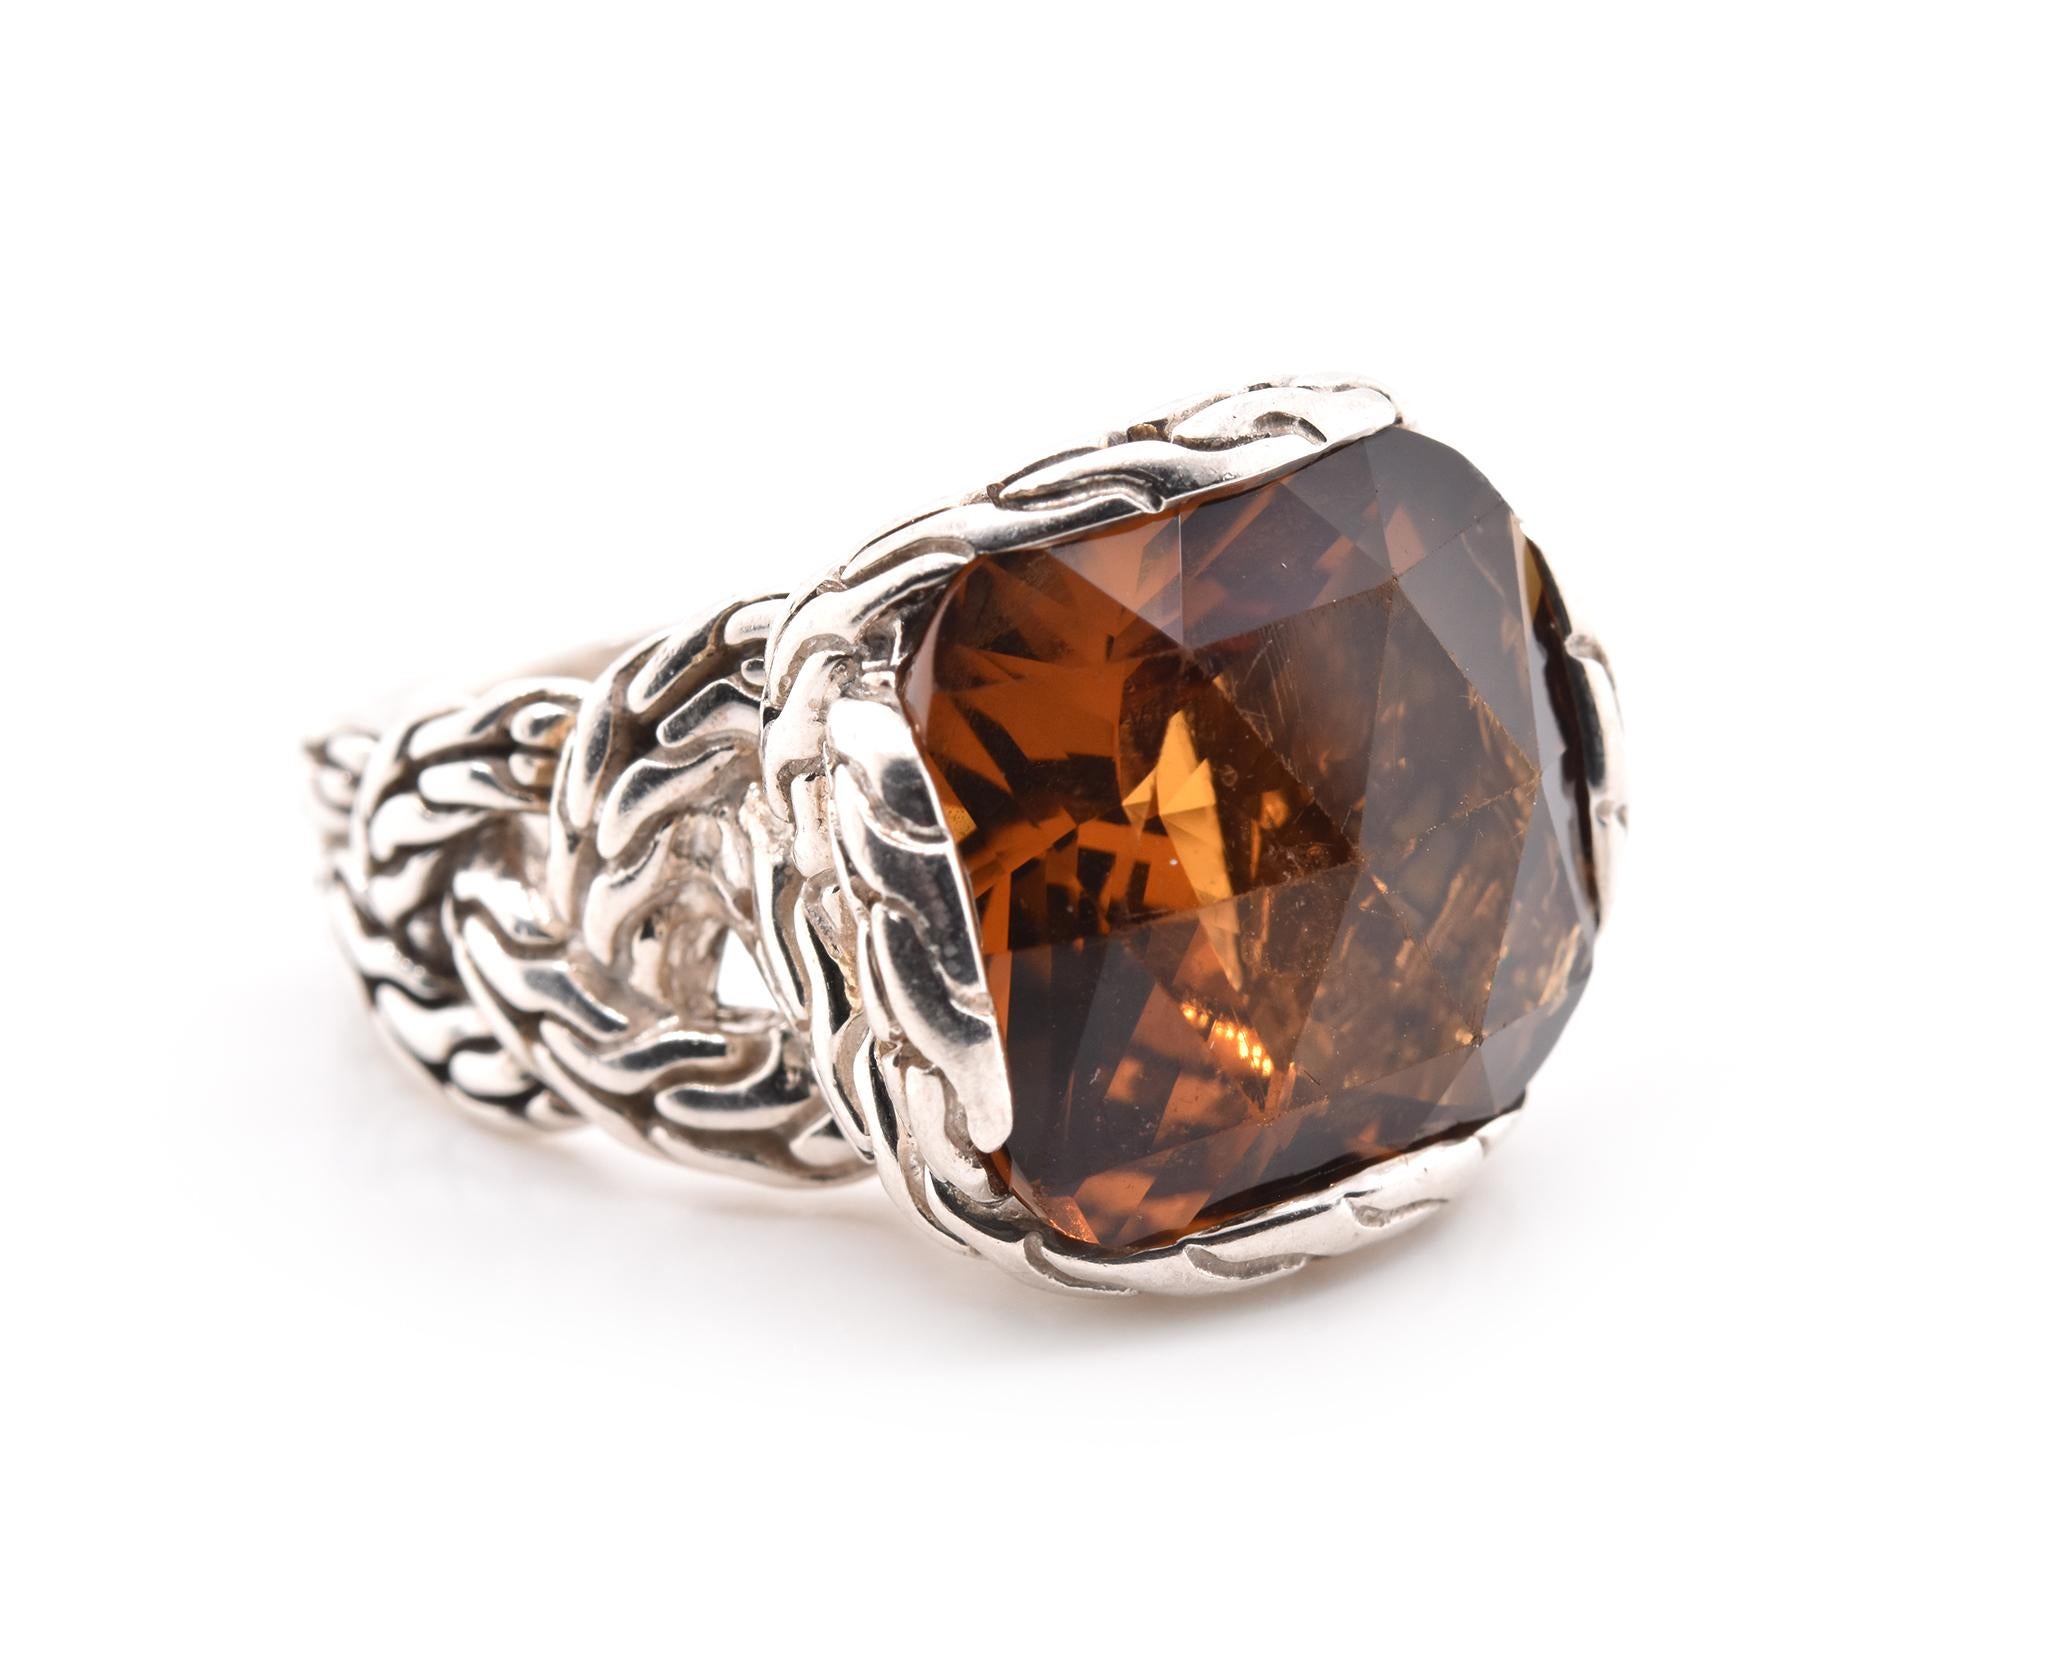 Designer: John Hardy
Material: sterling silver 
Gemstone: brown faceted Citrine
Ring Size: 6 (please allow 1-2 additional business days for sizing)
Dimensions: ring top measures 16.15mm x 16.60mm
Weight: 10.2 grams
